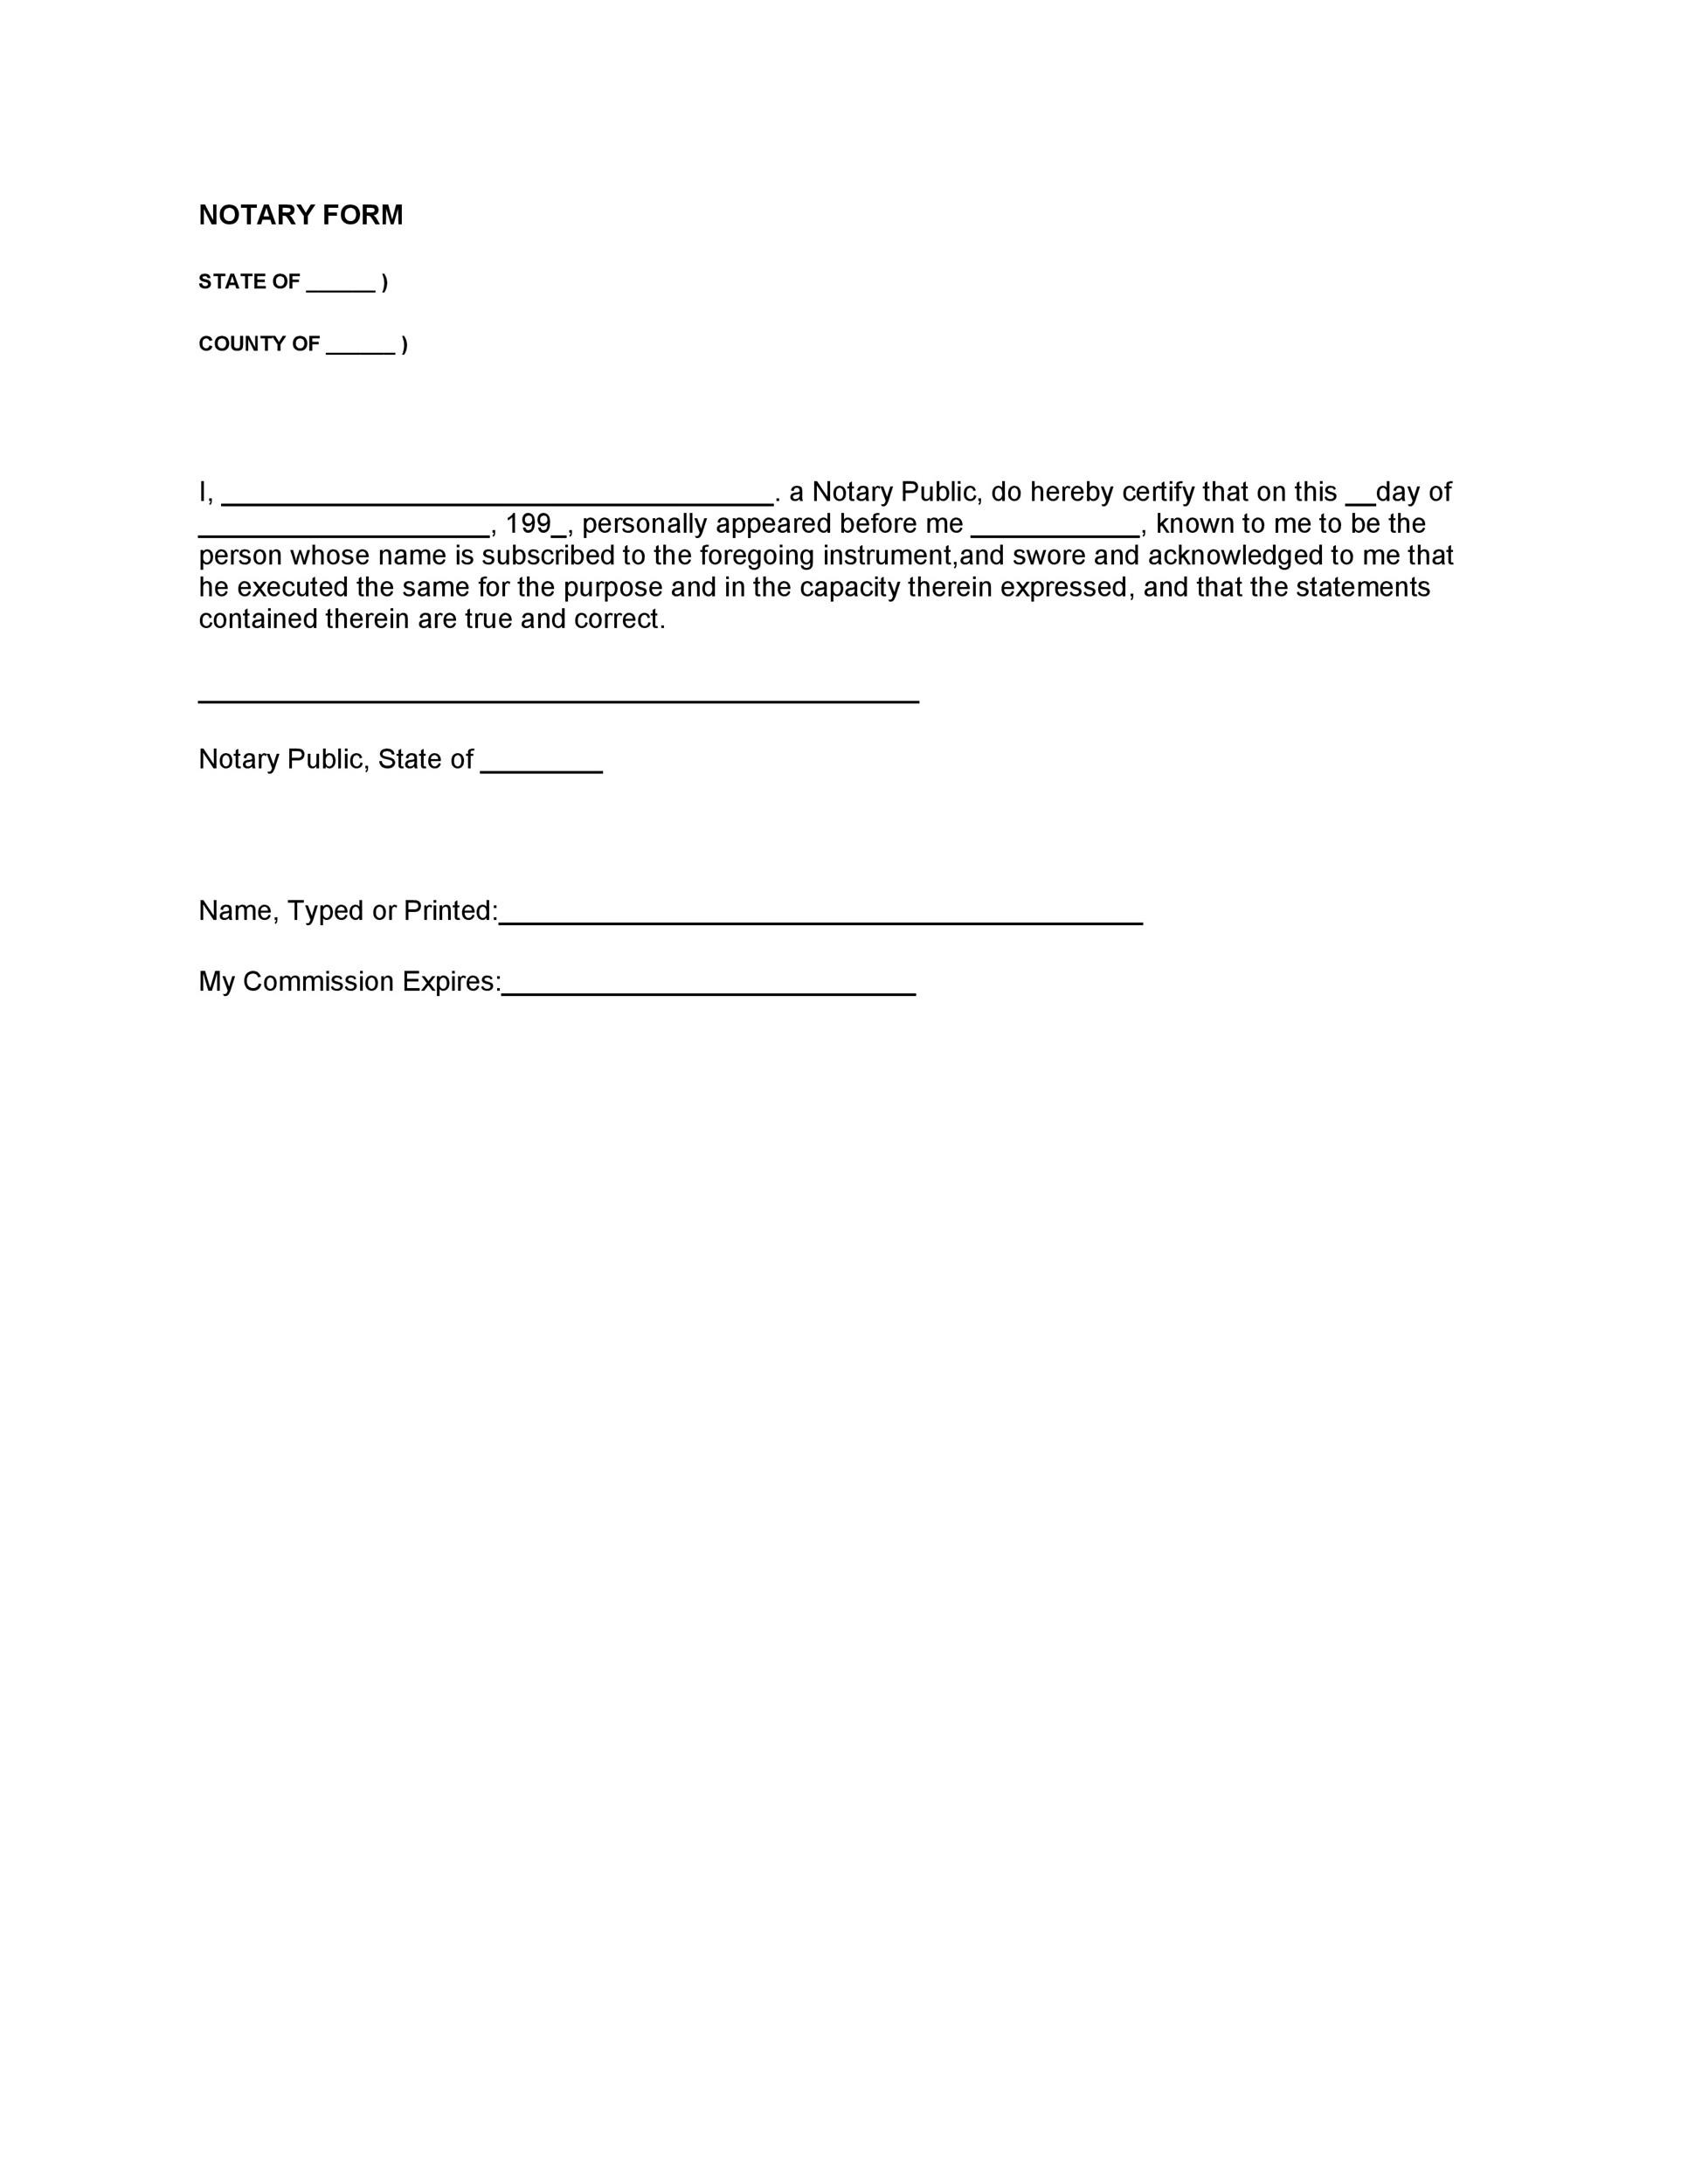 40 Free Notary Acknowledgement Statement Templates ᐅ TemplateLab